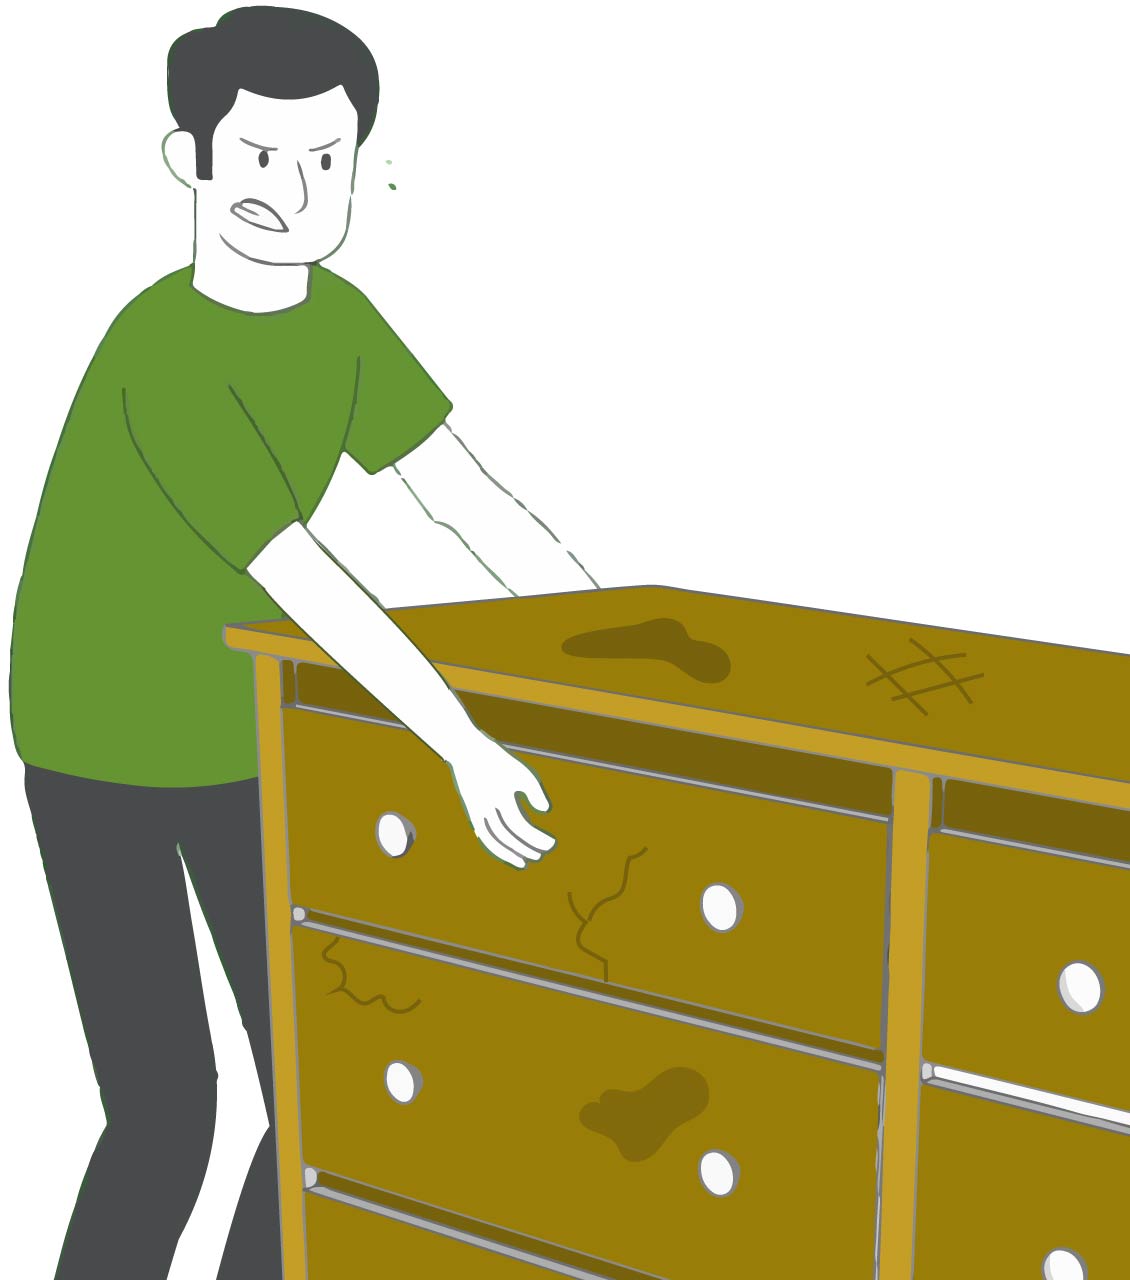 Stress-free Lexington Furniture Removal & Disposal Services